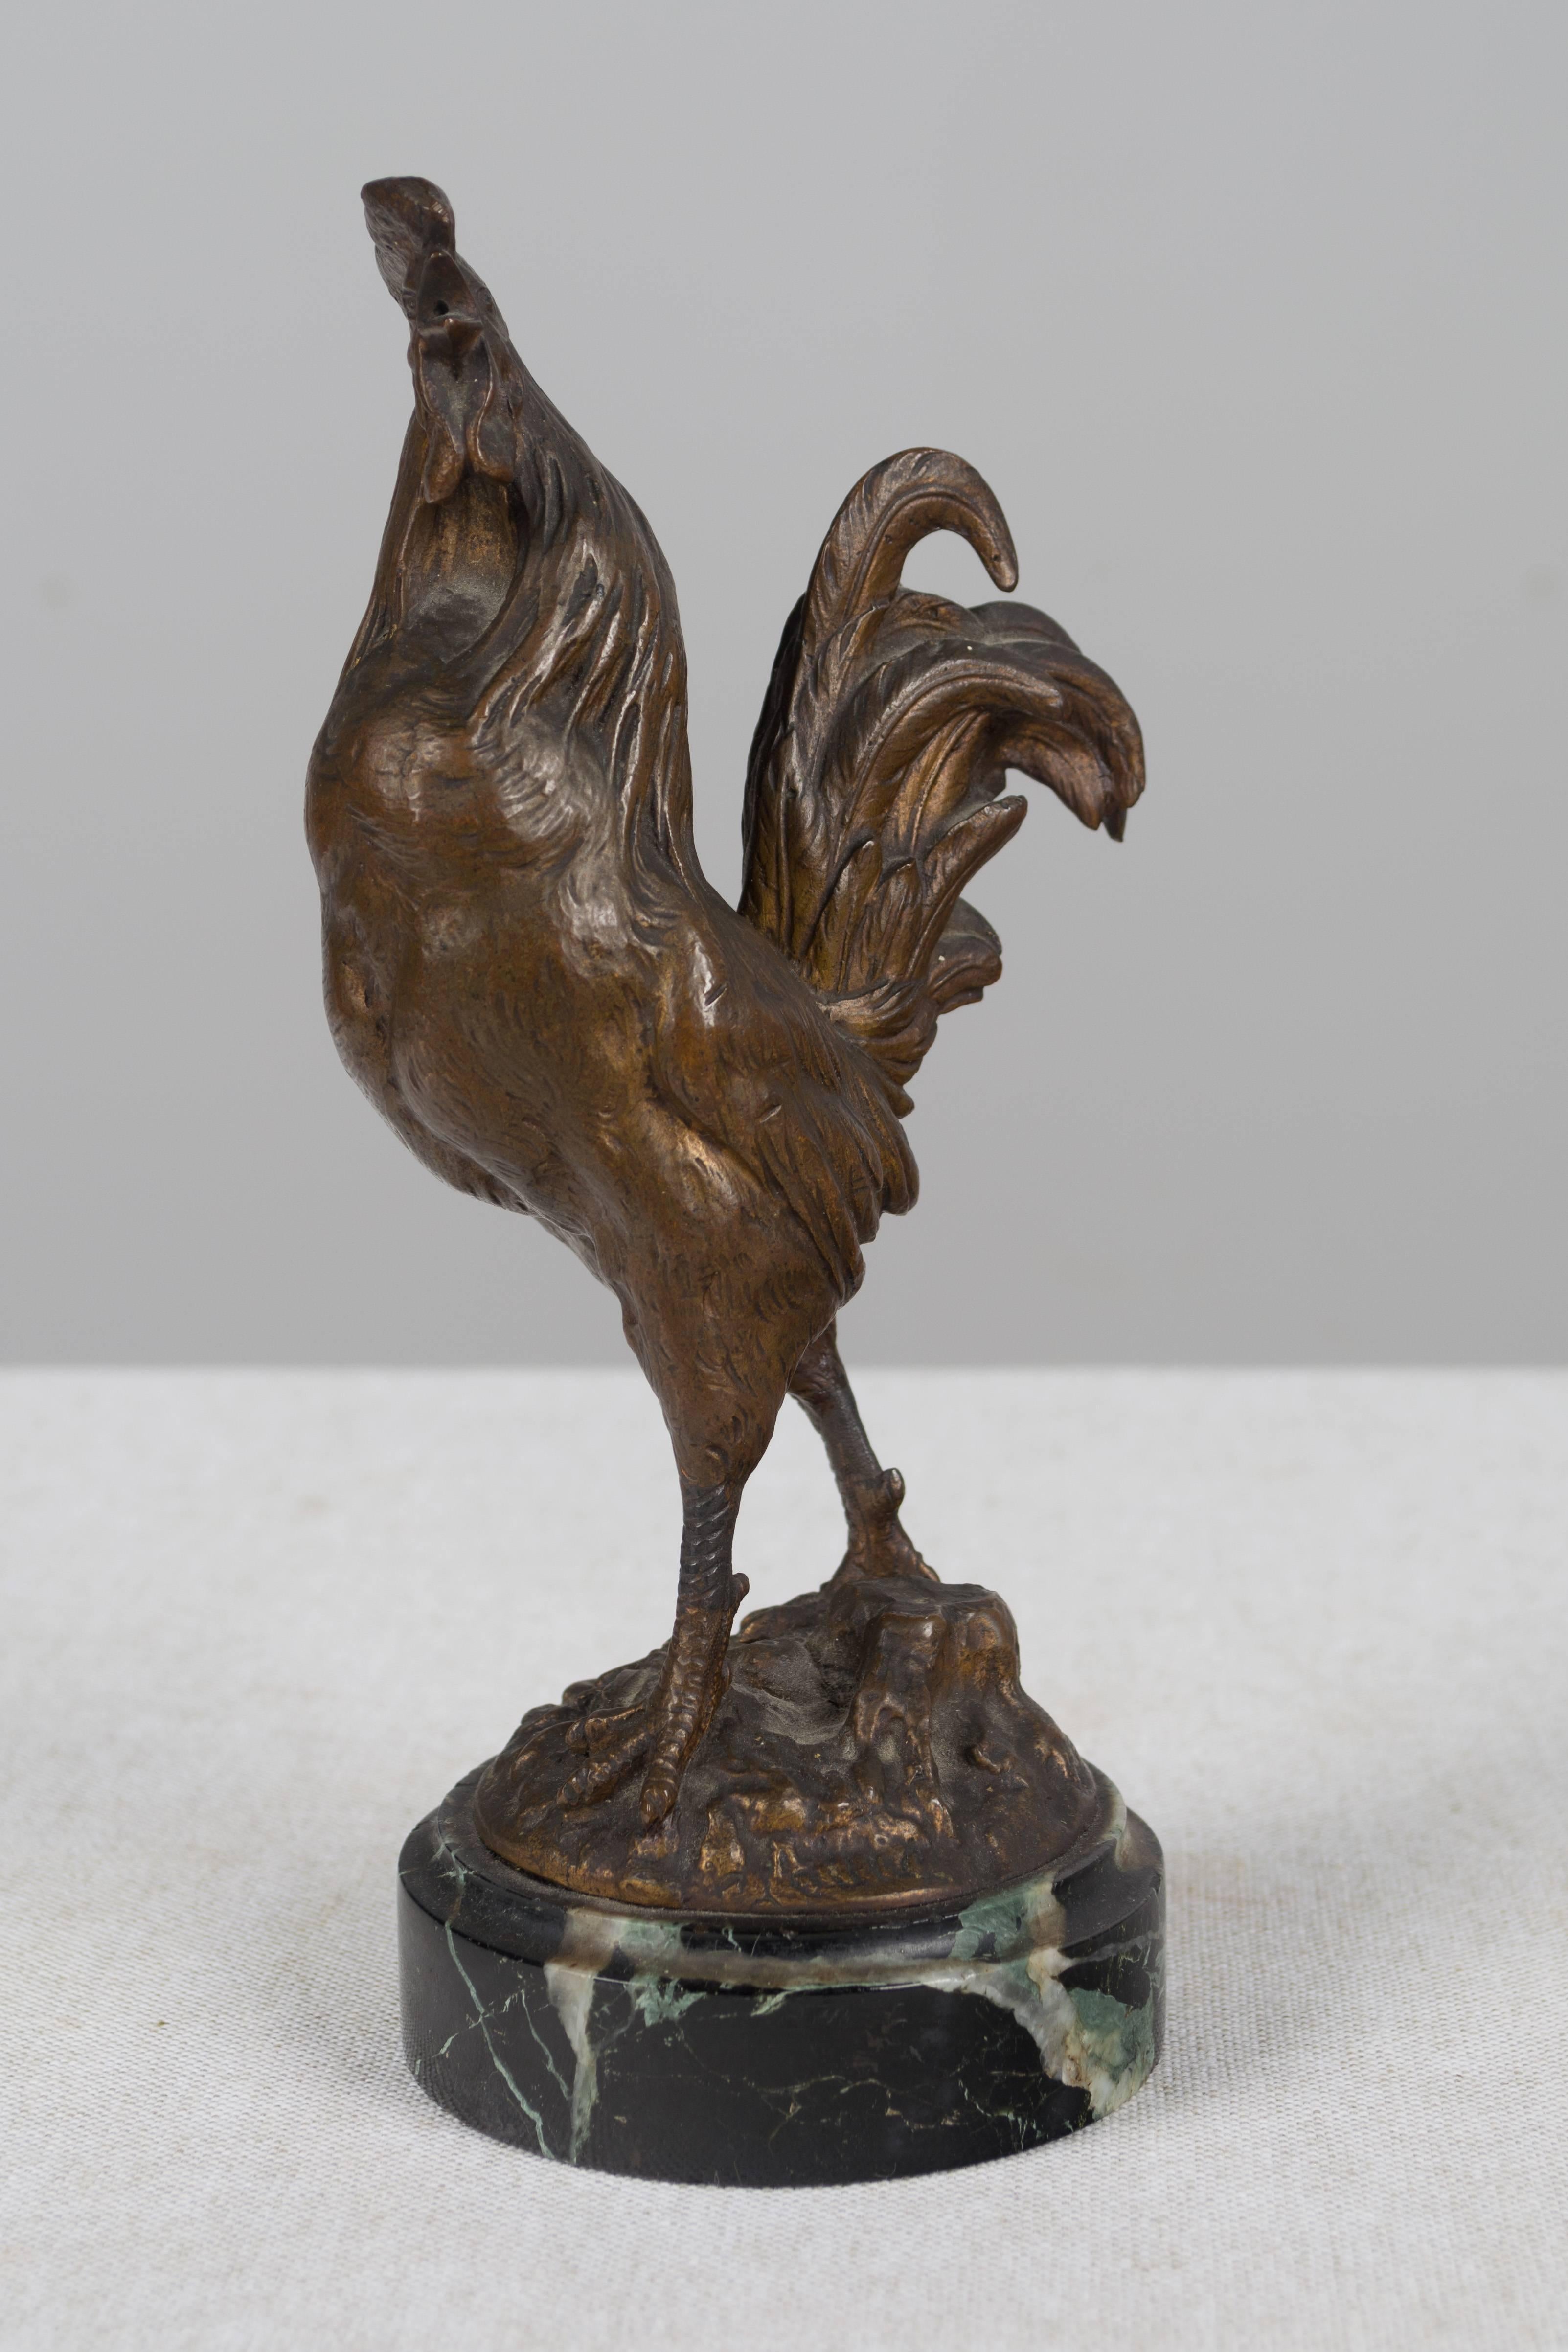 A small 19th century French cast bronze rooster on a marble base by Charles Paillet (1871-1931), a sculptor whose main emphasis was animals subjects. Signed C. Paillet. Weight 2.6 lbs. More photos available upon request. We have a large selection of